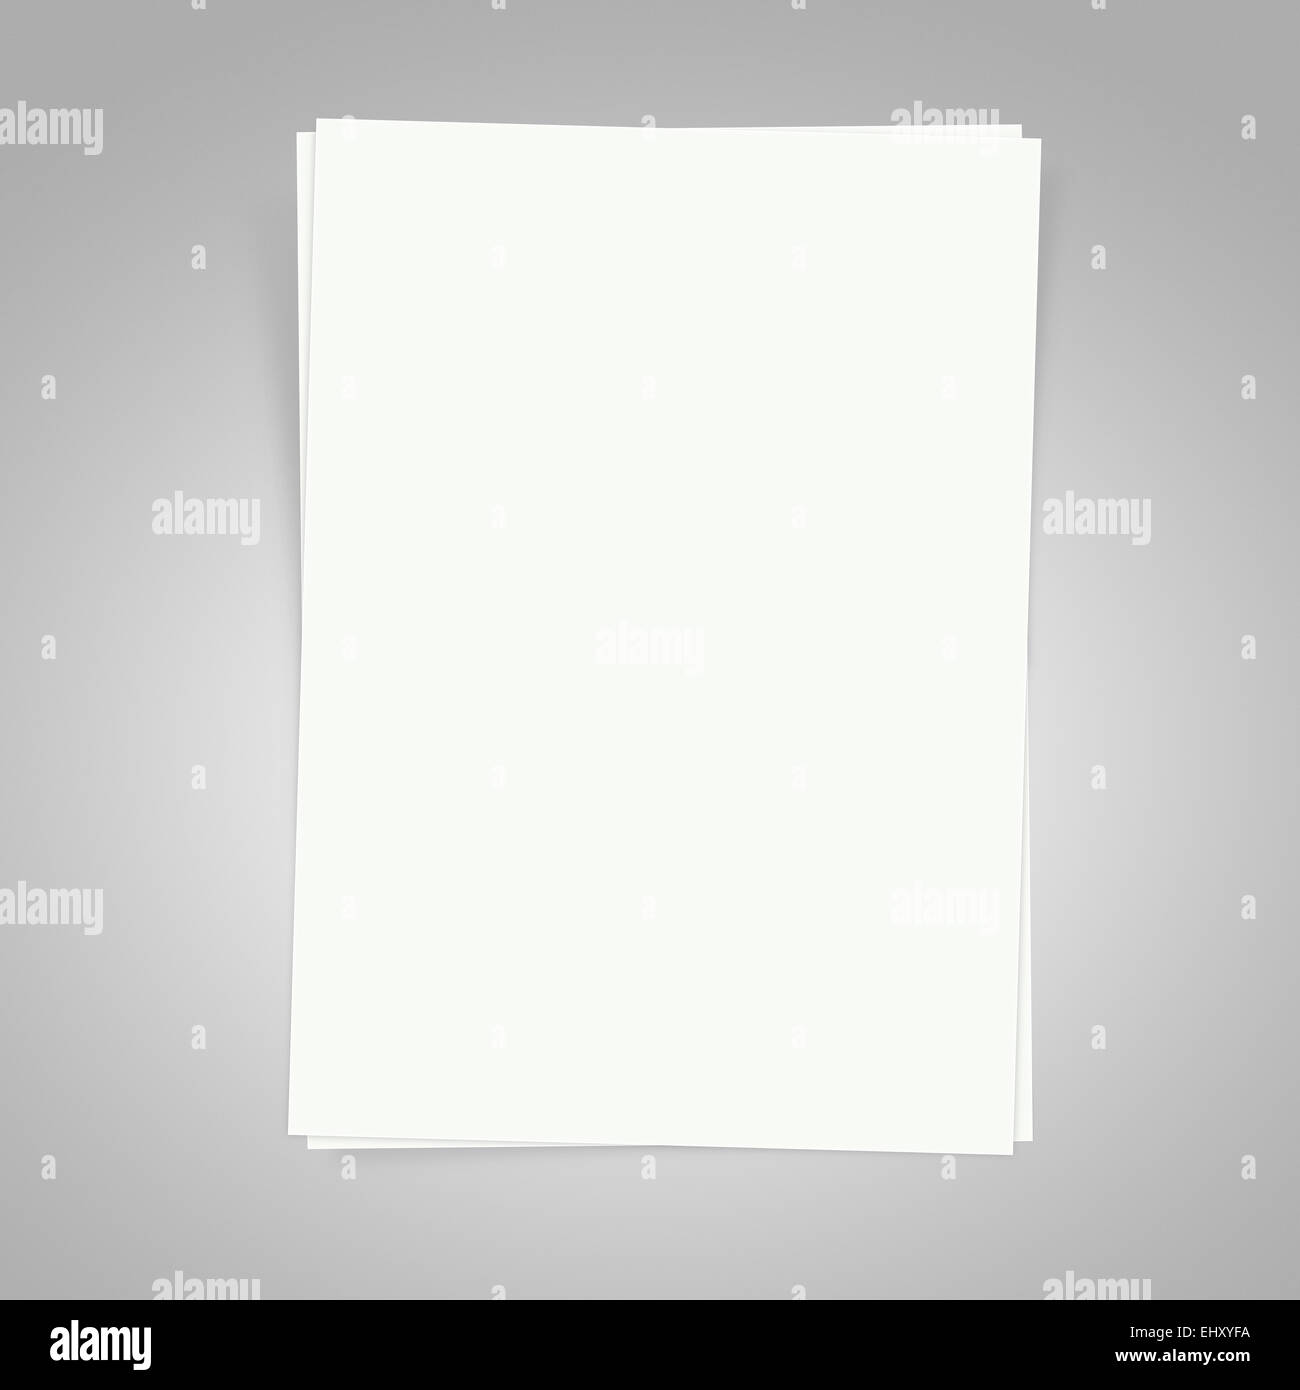 Blank white papers on a gray background with shadows Stock Photo